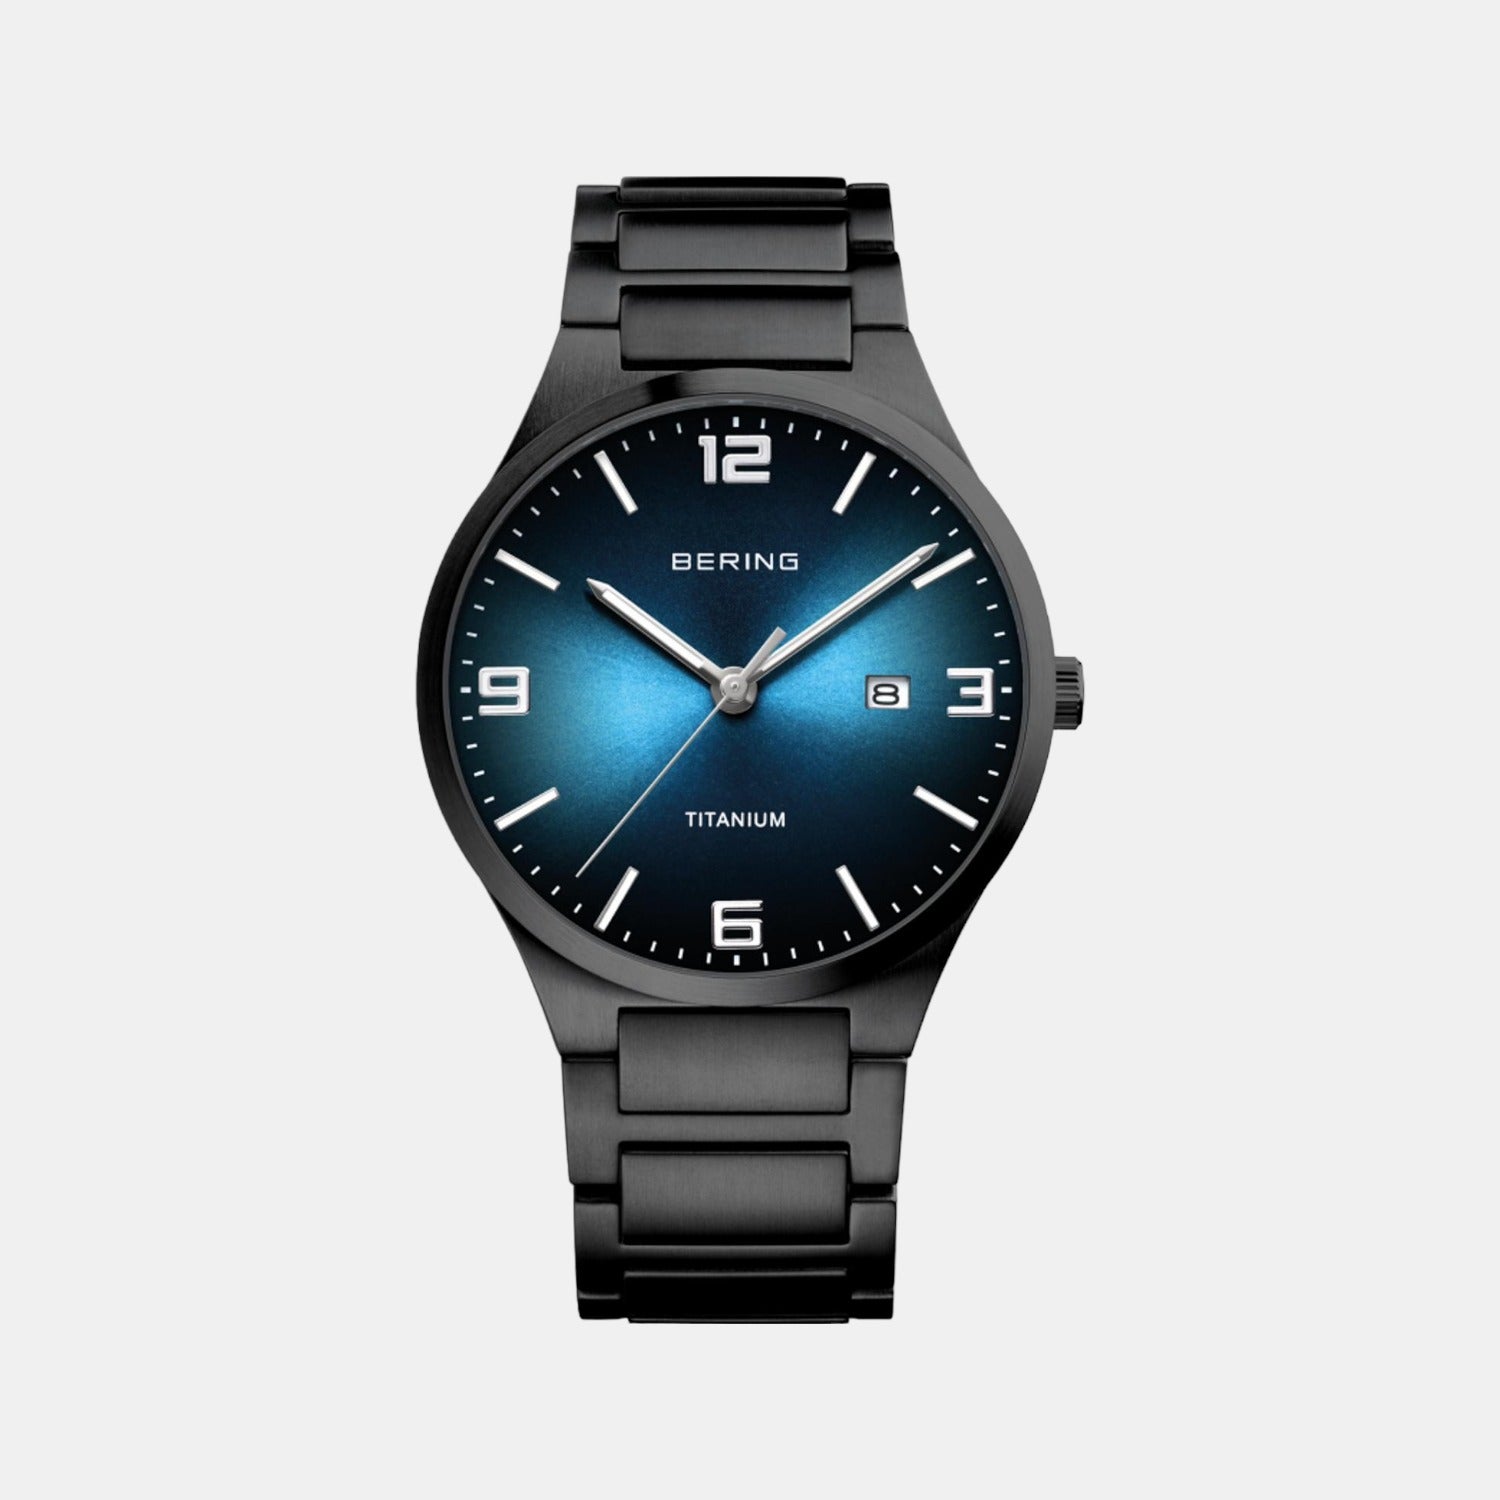 Male Black Analog Stainless Steel Watch 15240-727